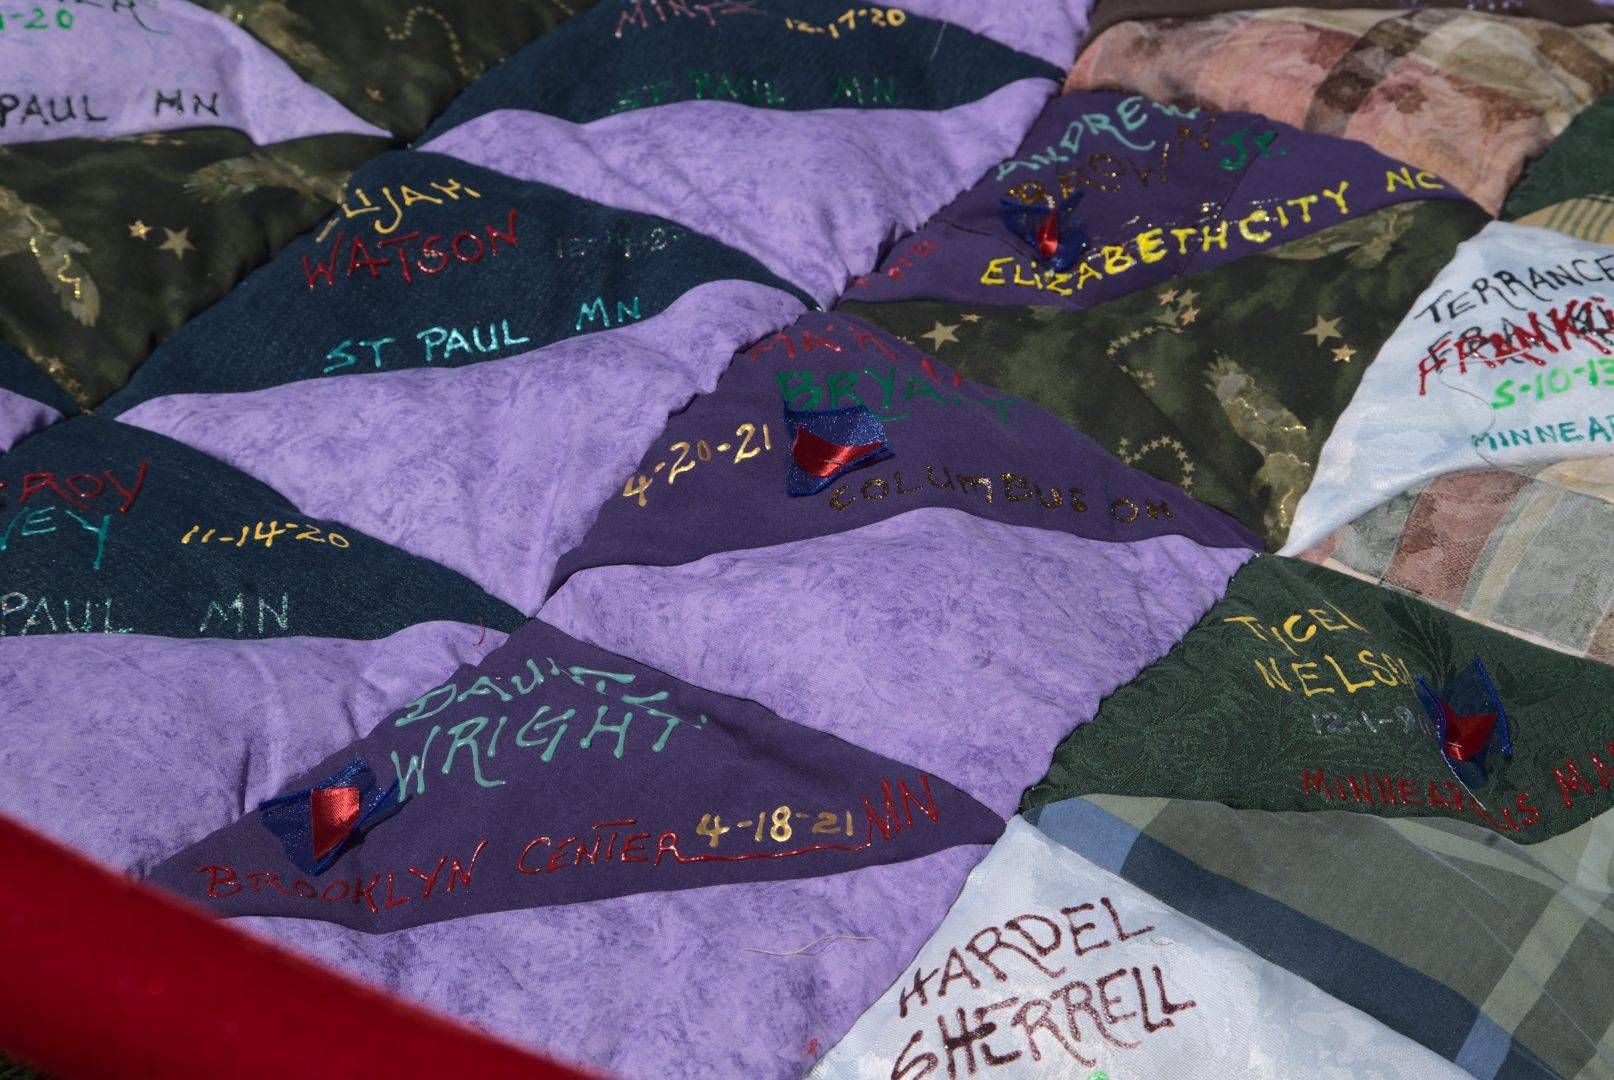 A quilt with Daunte Wright's name, and that of others, outside of the gravestone memorial near George Floyd Square